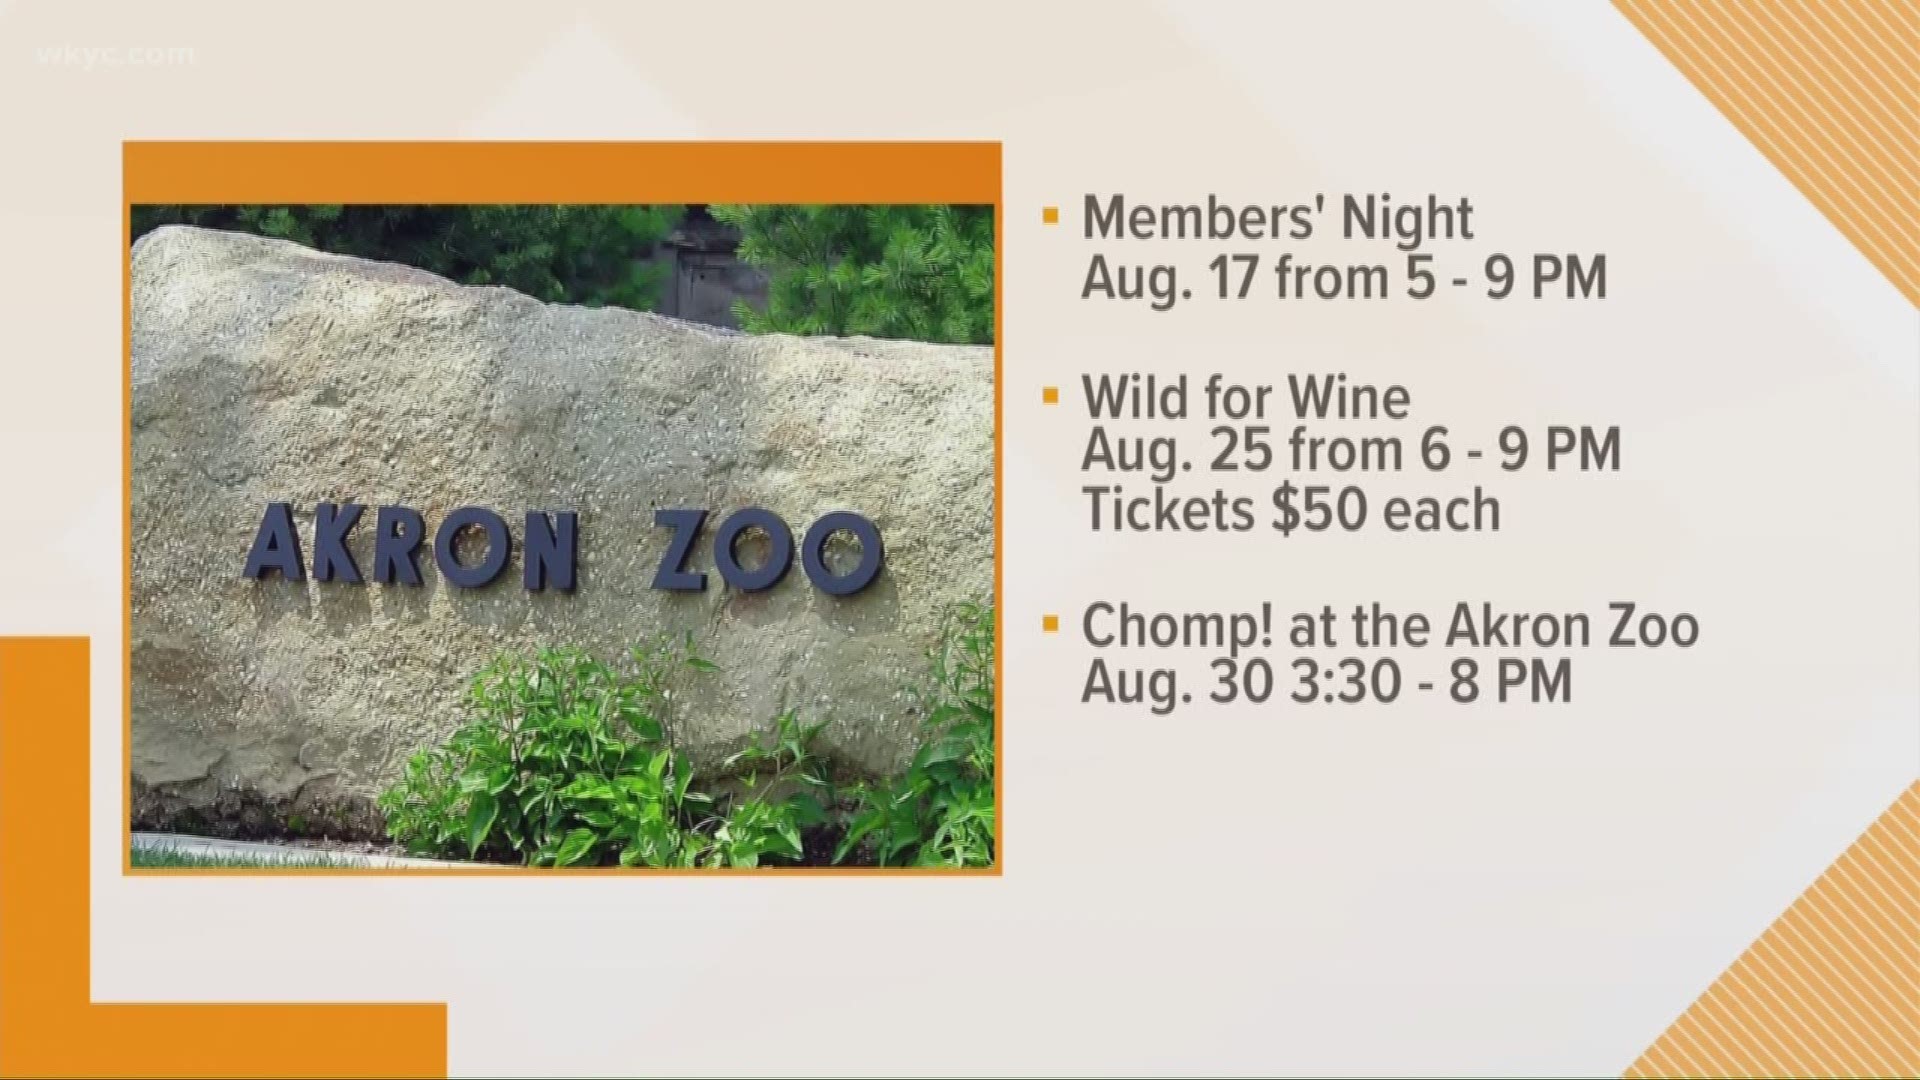 Aug. 13, 2018: We have a look at some of the events coming soon to the Akron Zoo.